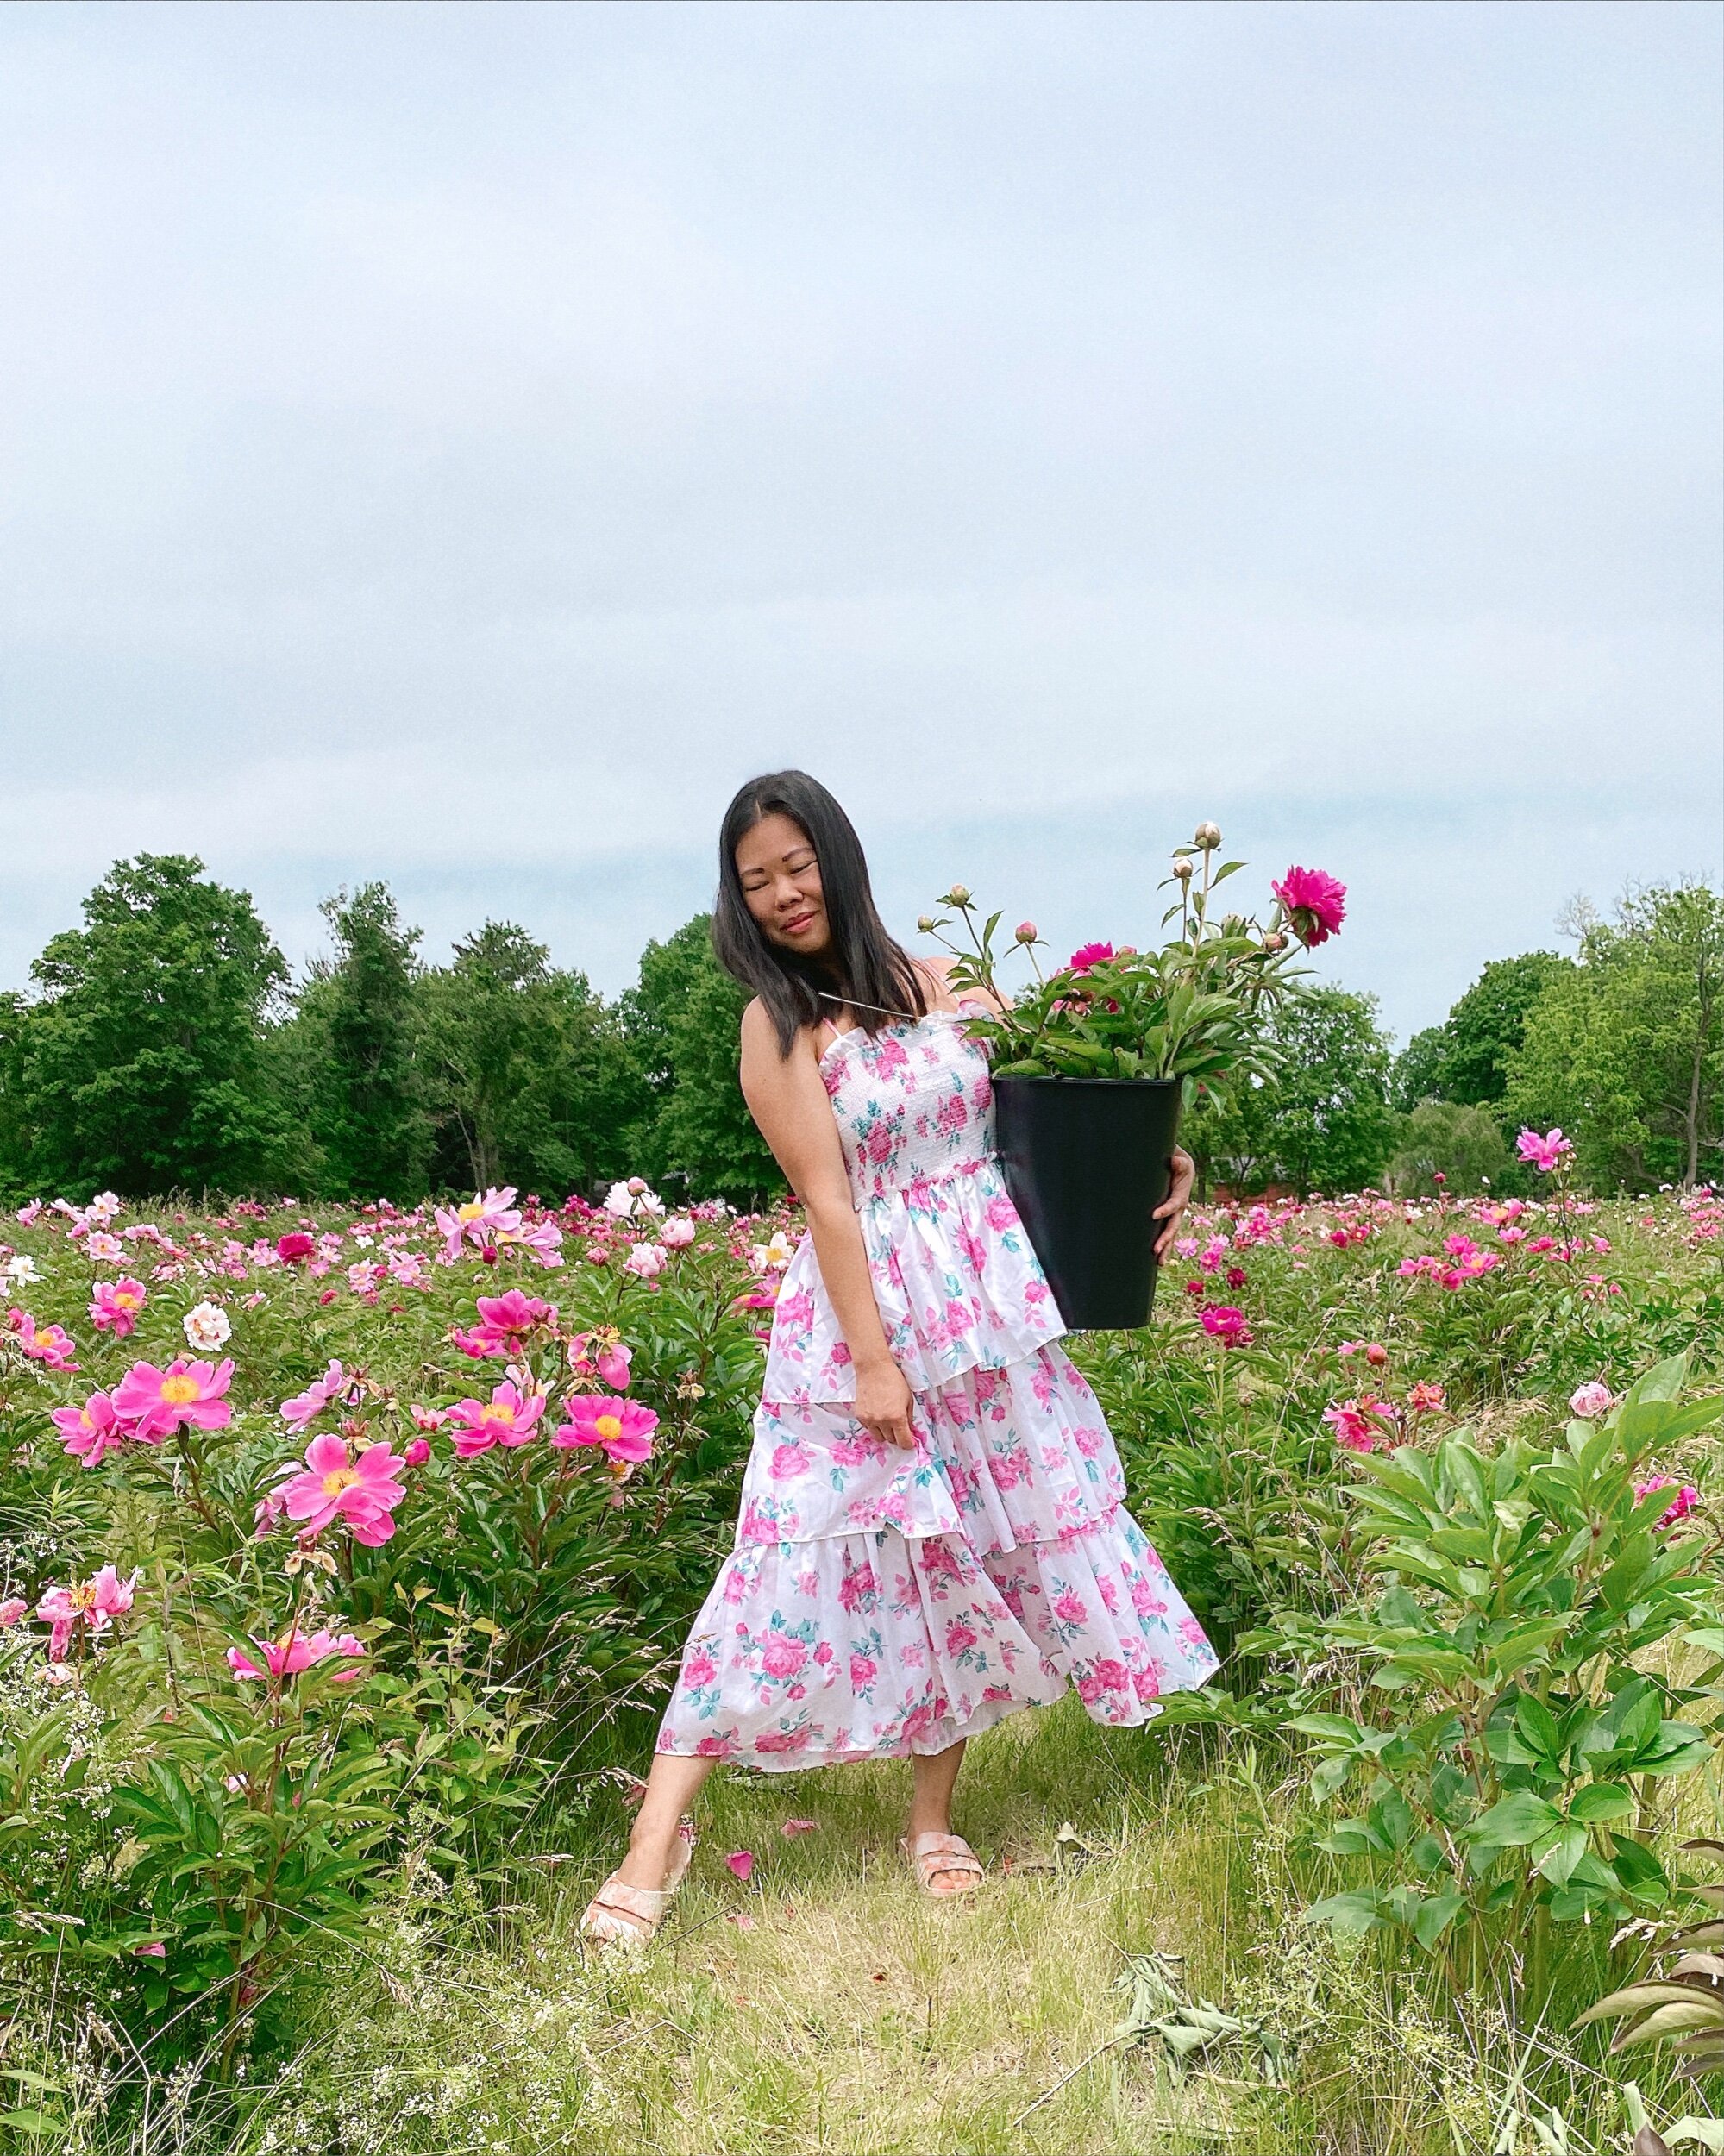 Pandemic Hobbies: Garden Collecting — Not A Rose Girl by Jamie Ng Rose